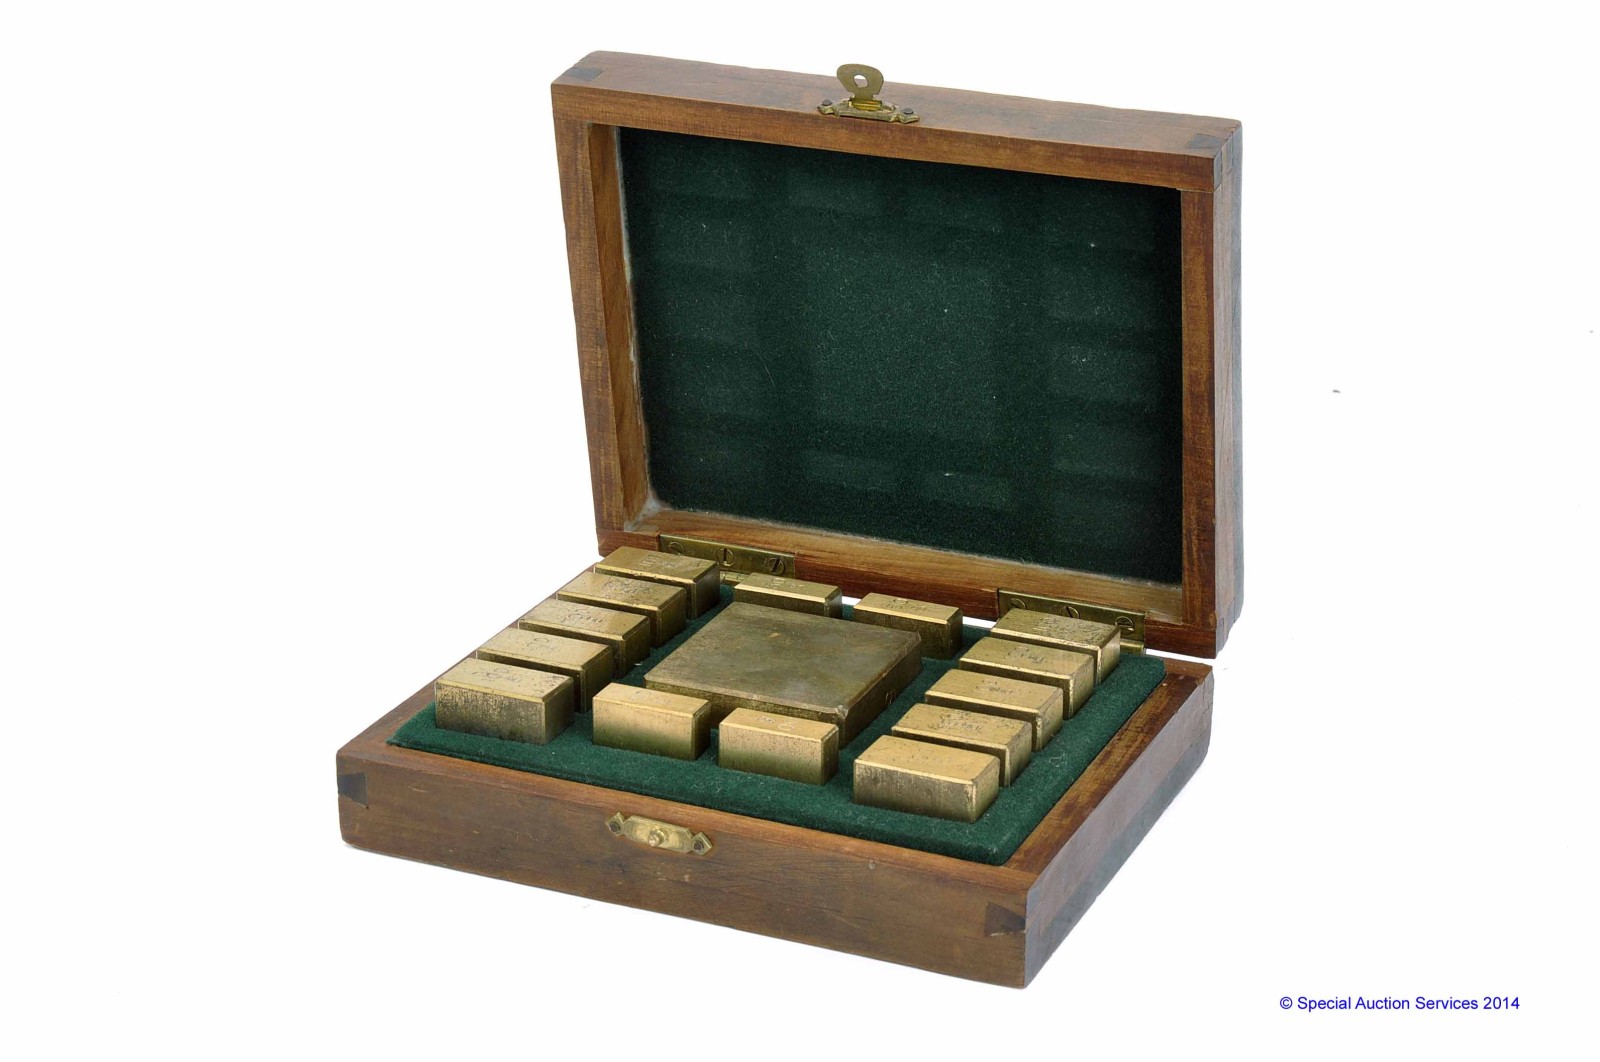 A set of fifteen brass Rectangular Weights, 500 Grams to 50 Grams, in fitted mahogany case, 165mm